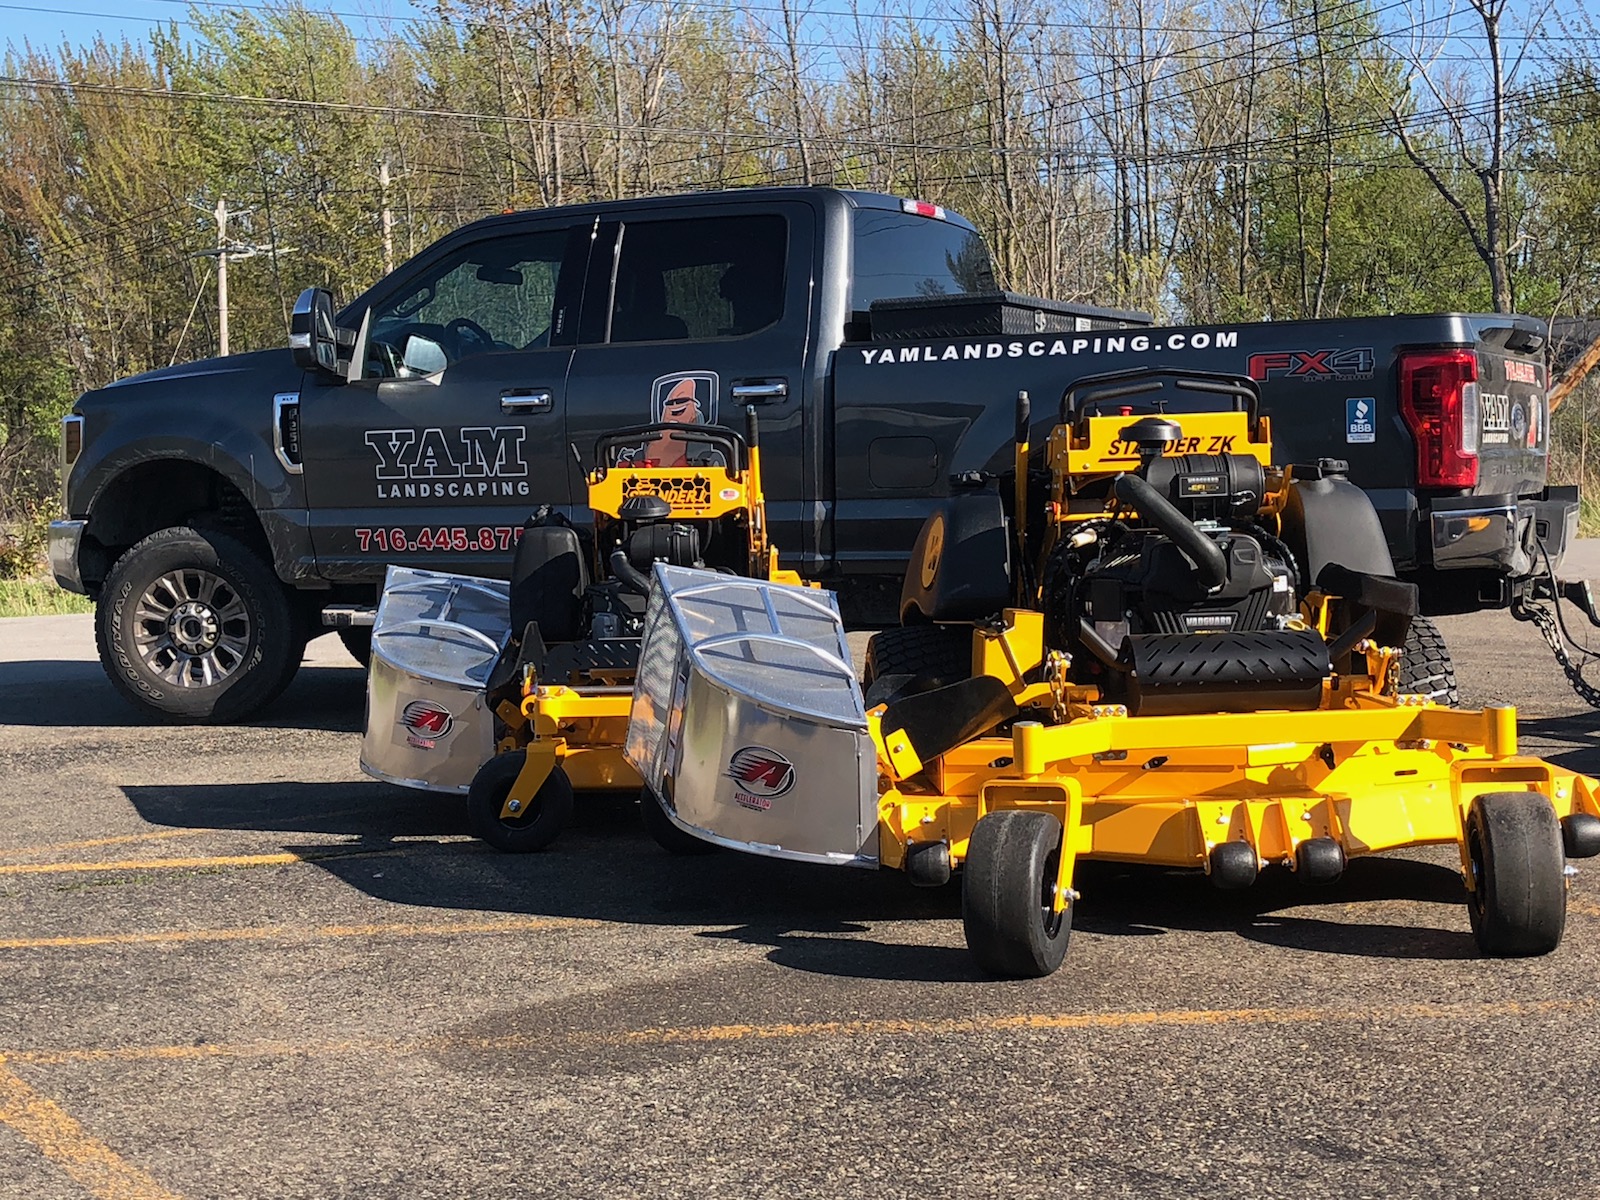 Truck and mowers